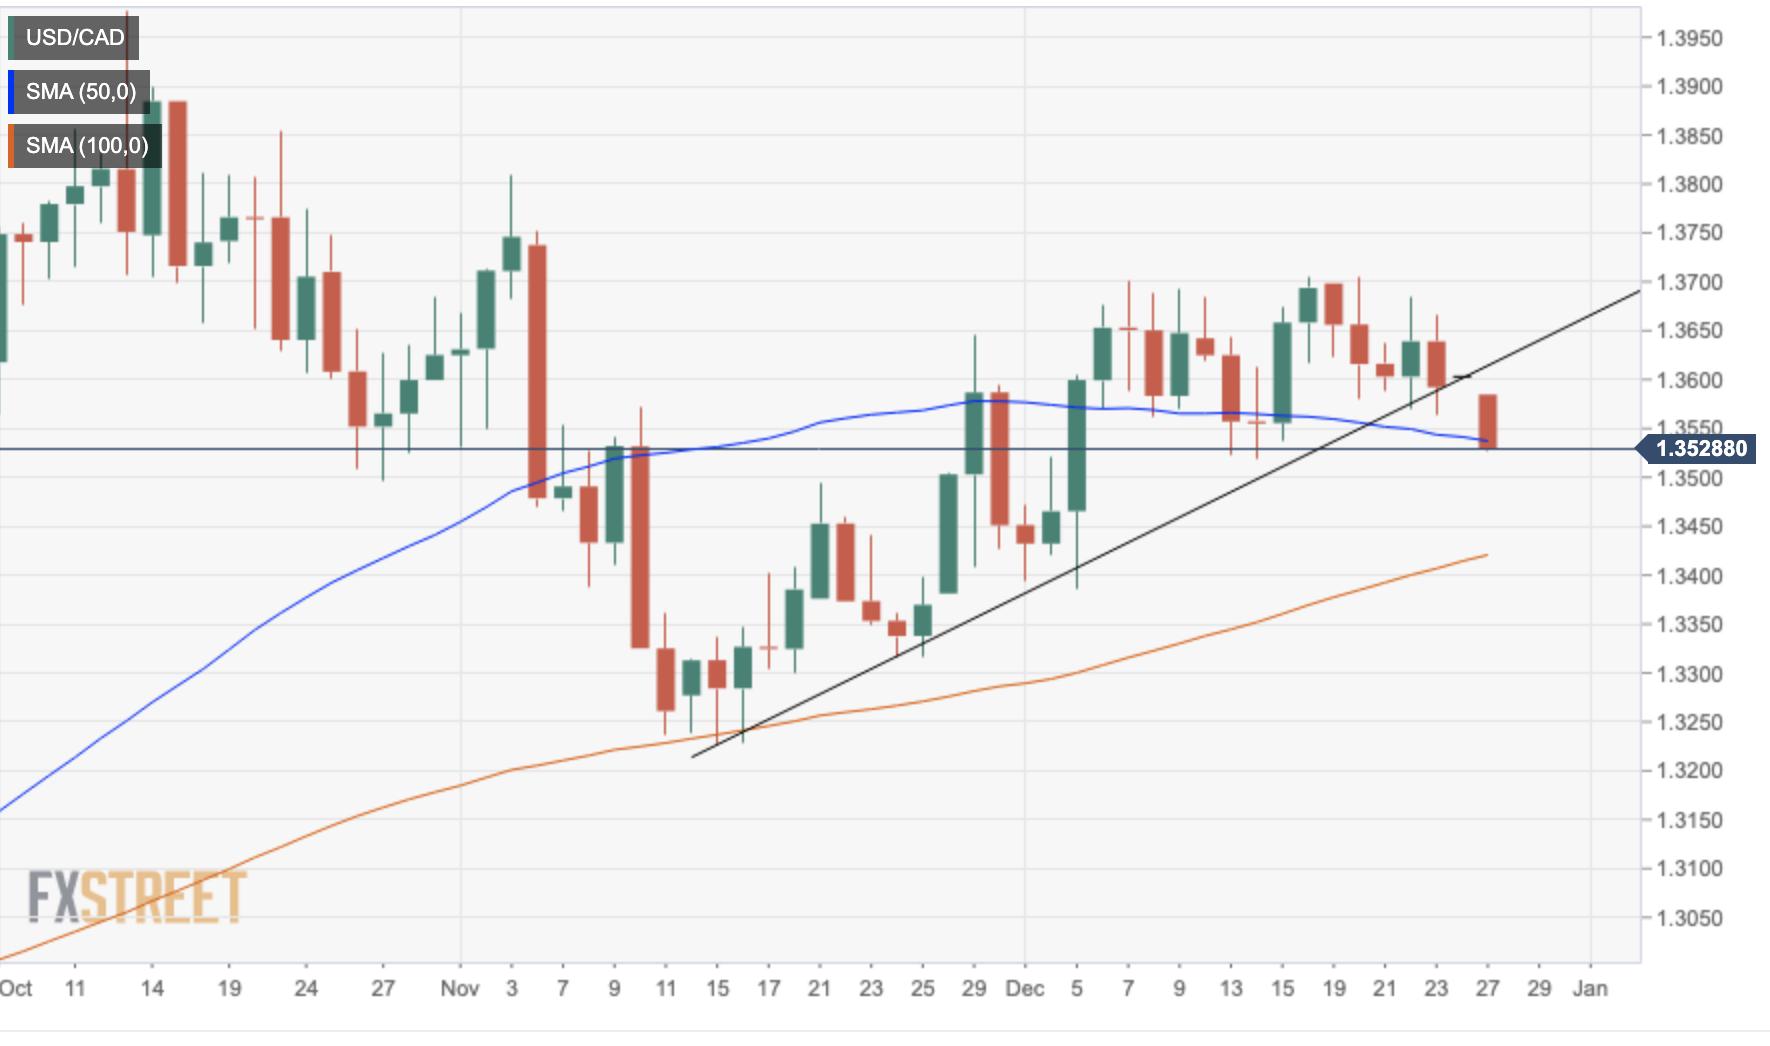 USD/CAD keeps heading south and approaches important support at 1.3520